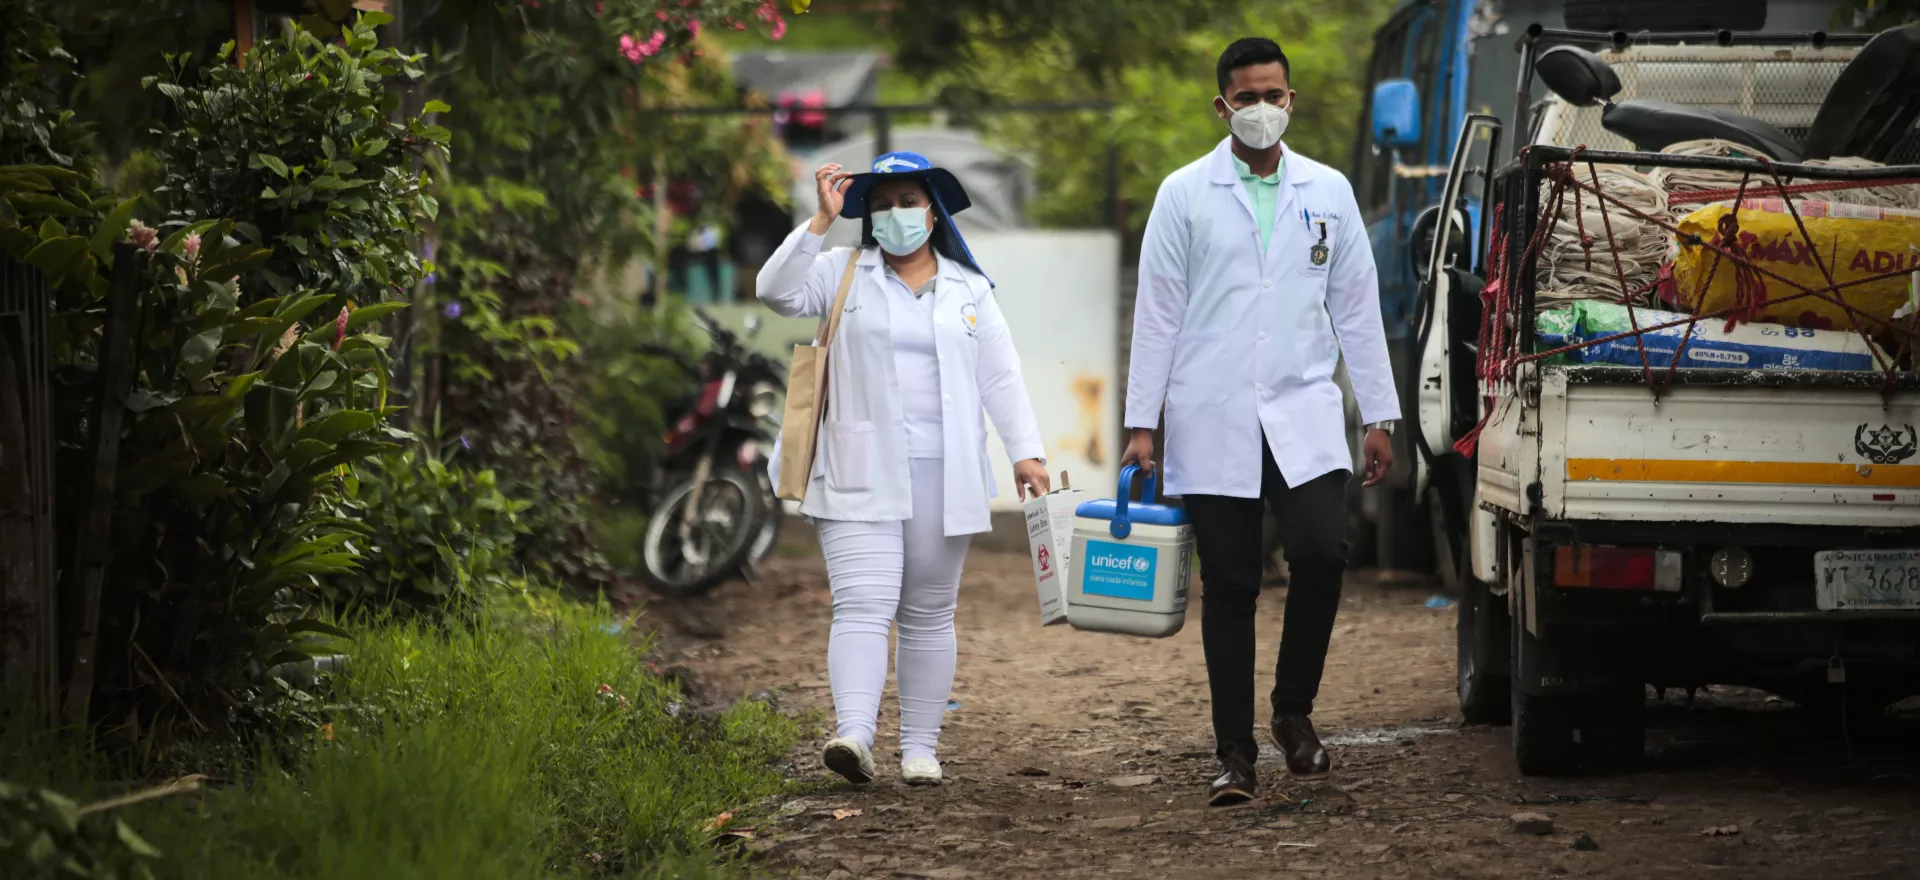 Health workers walk through the streets of Matagalpa, a city in northern Nicaragua, as part of a door-to-door vaccination campaign. 